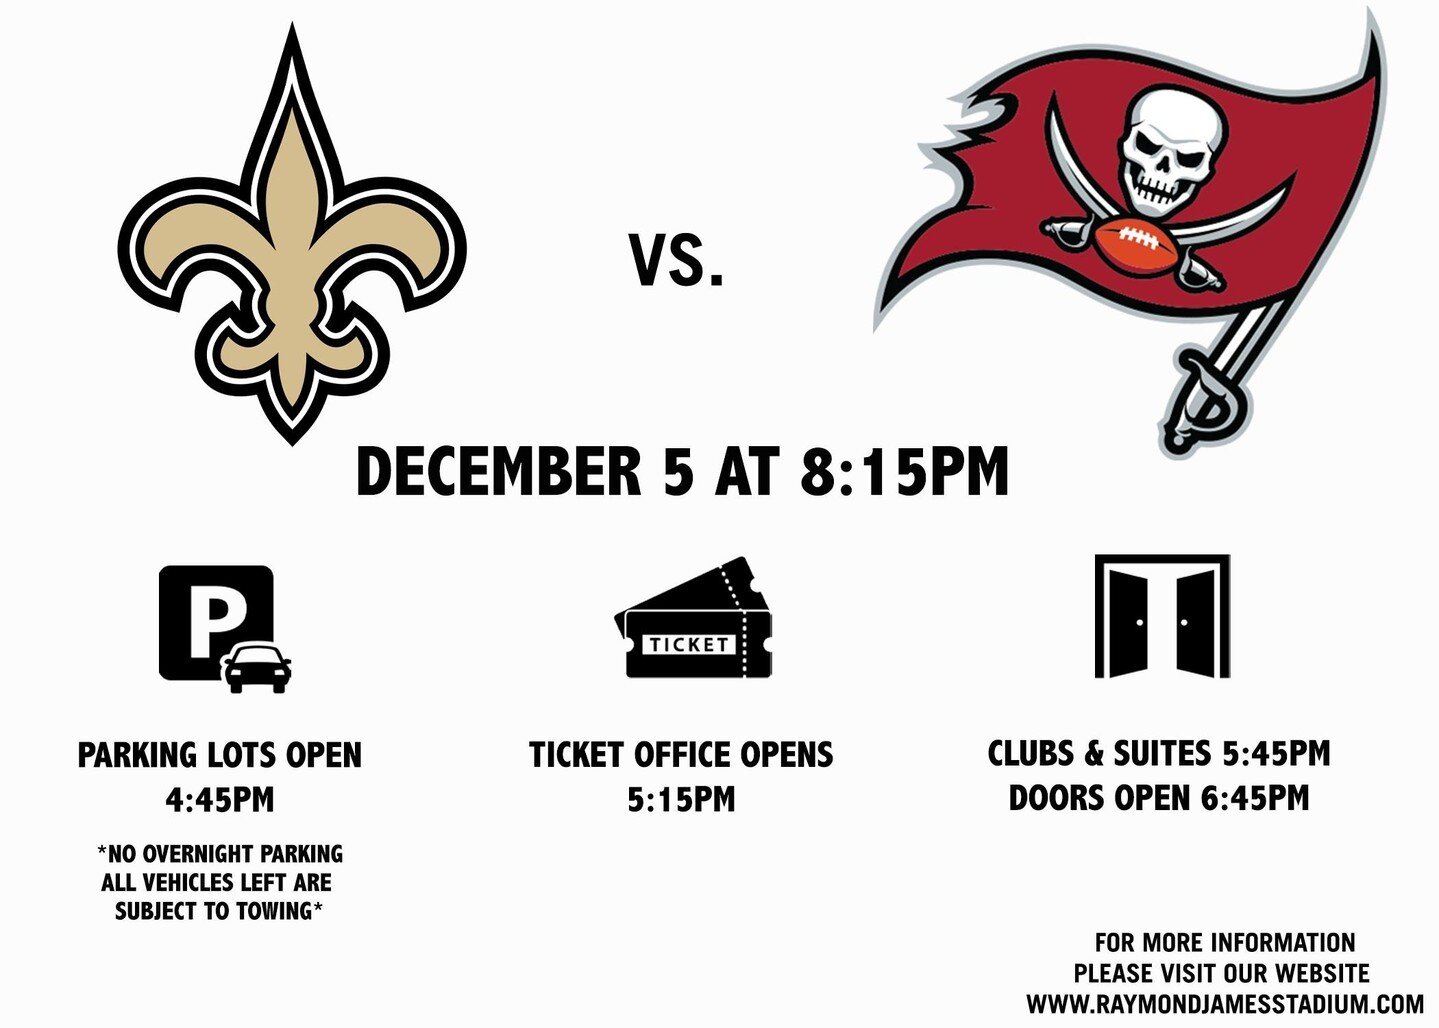 Know before you go to the Saints vs. Buccaneers game on Monday!